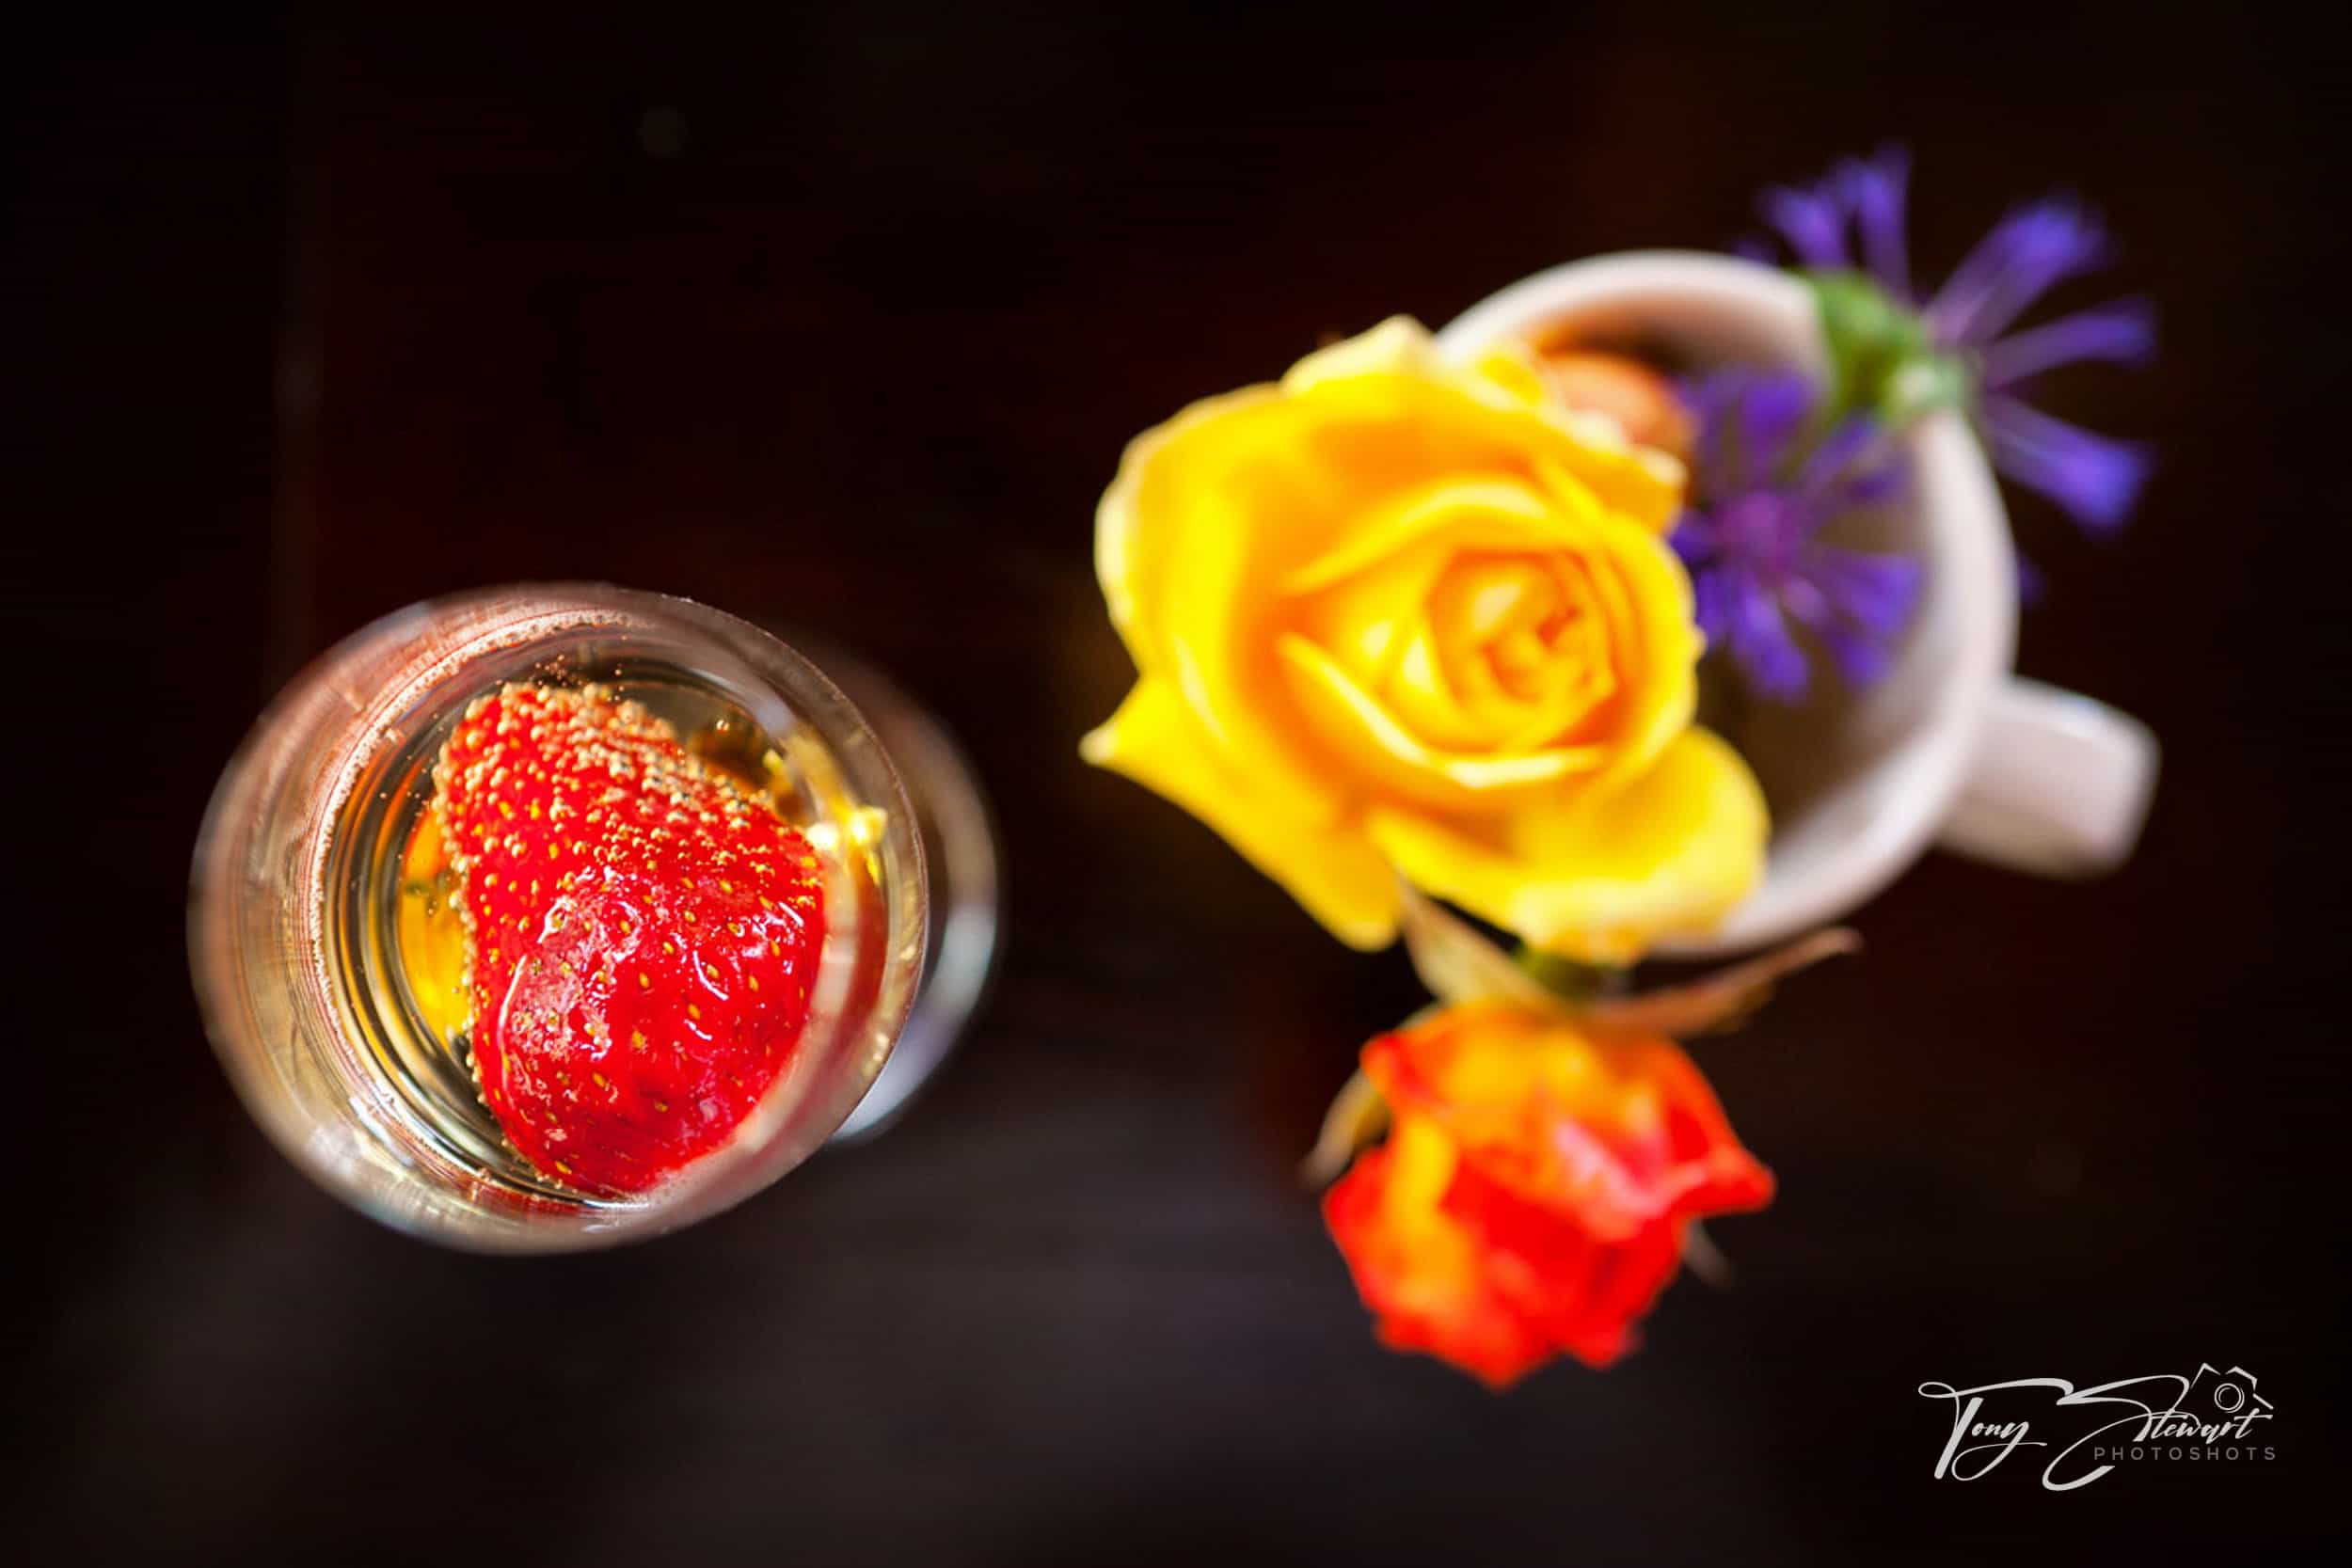 Strawberry in wine glass stands beside a posy of bright flowers in a mug viewed from above.